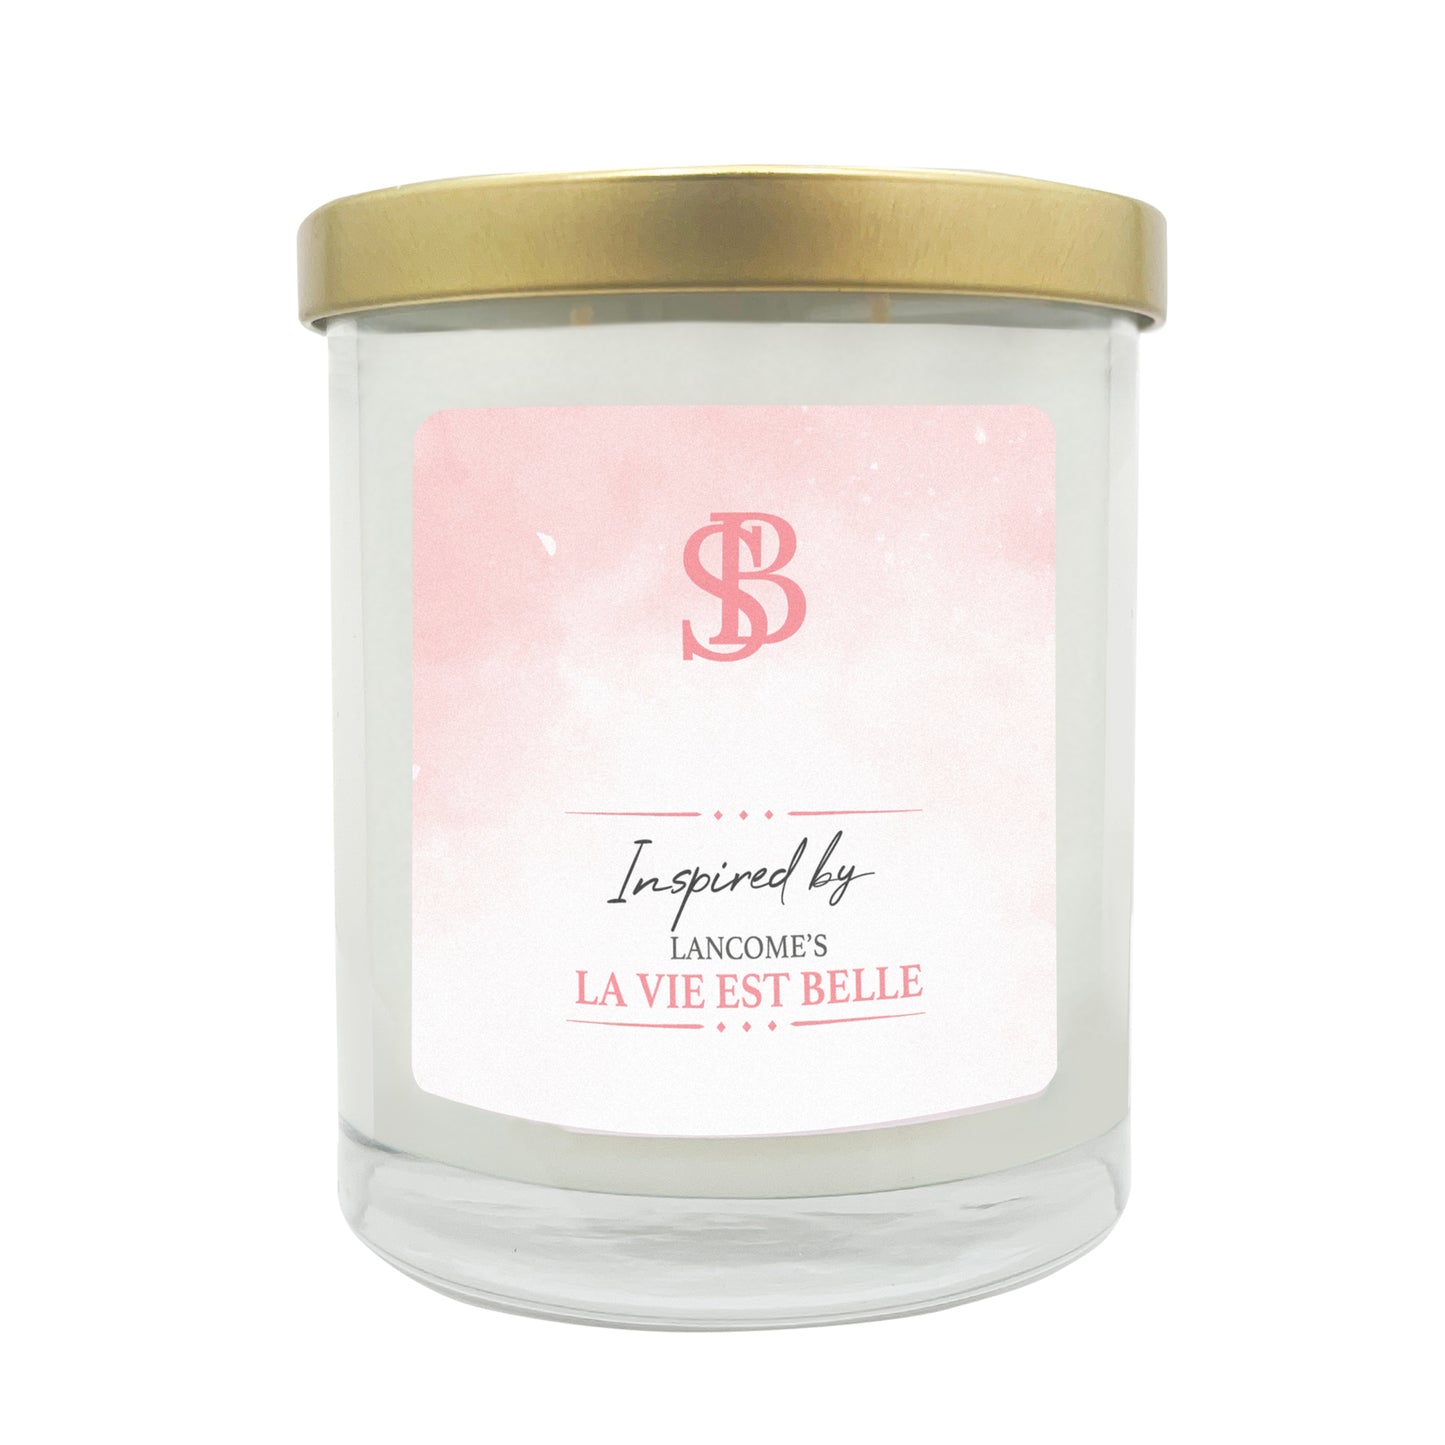 INSPIRED BY LANCOME'S LA VIE EST BELLE | Soy Scented Candle 11 oz